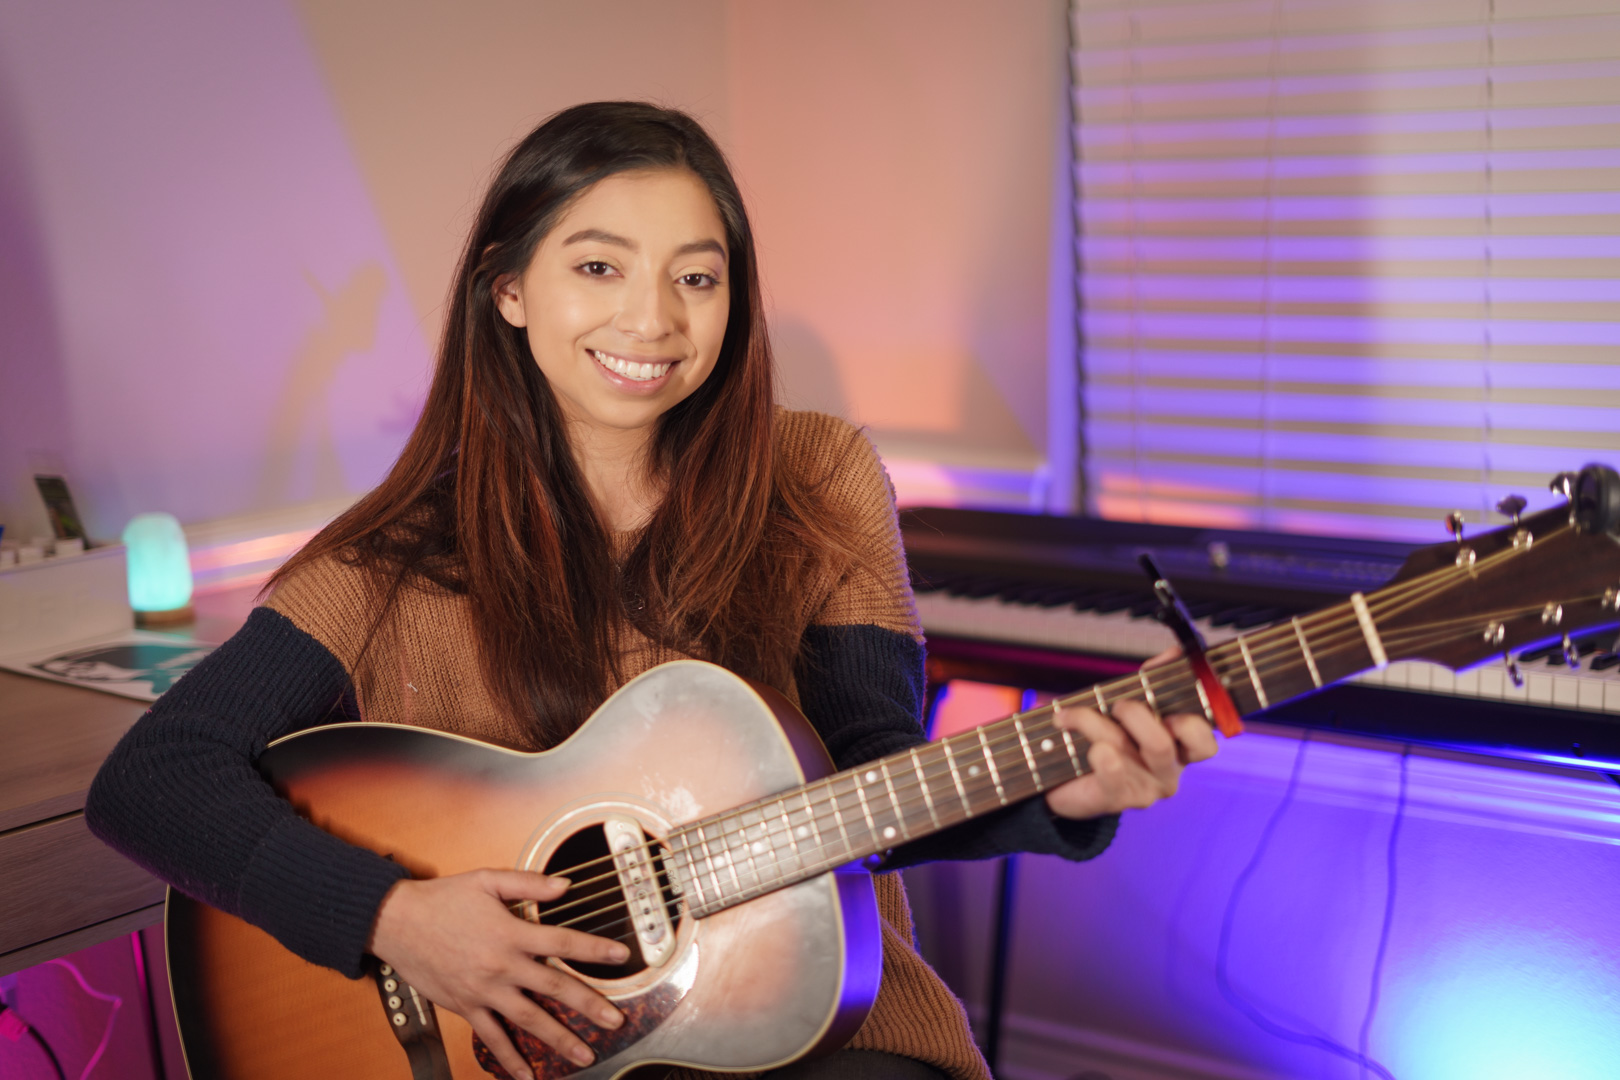 A young girl with long brown hair holds a guitar while smiling.